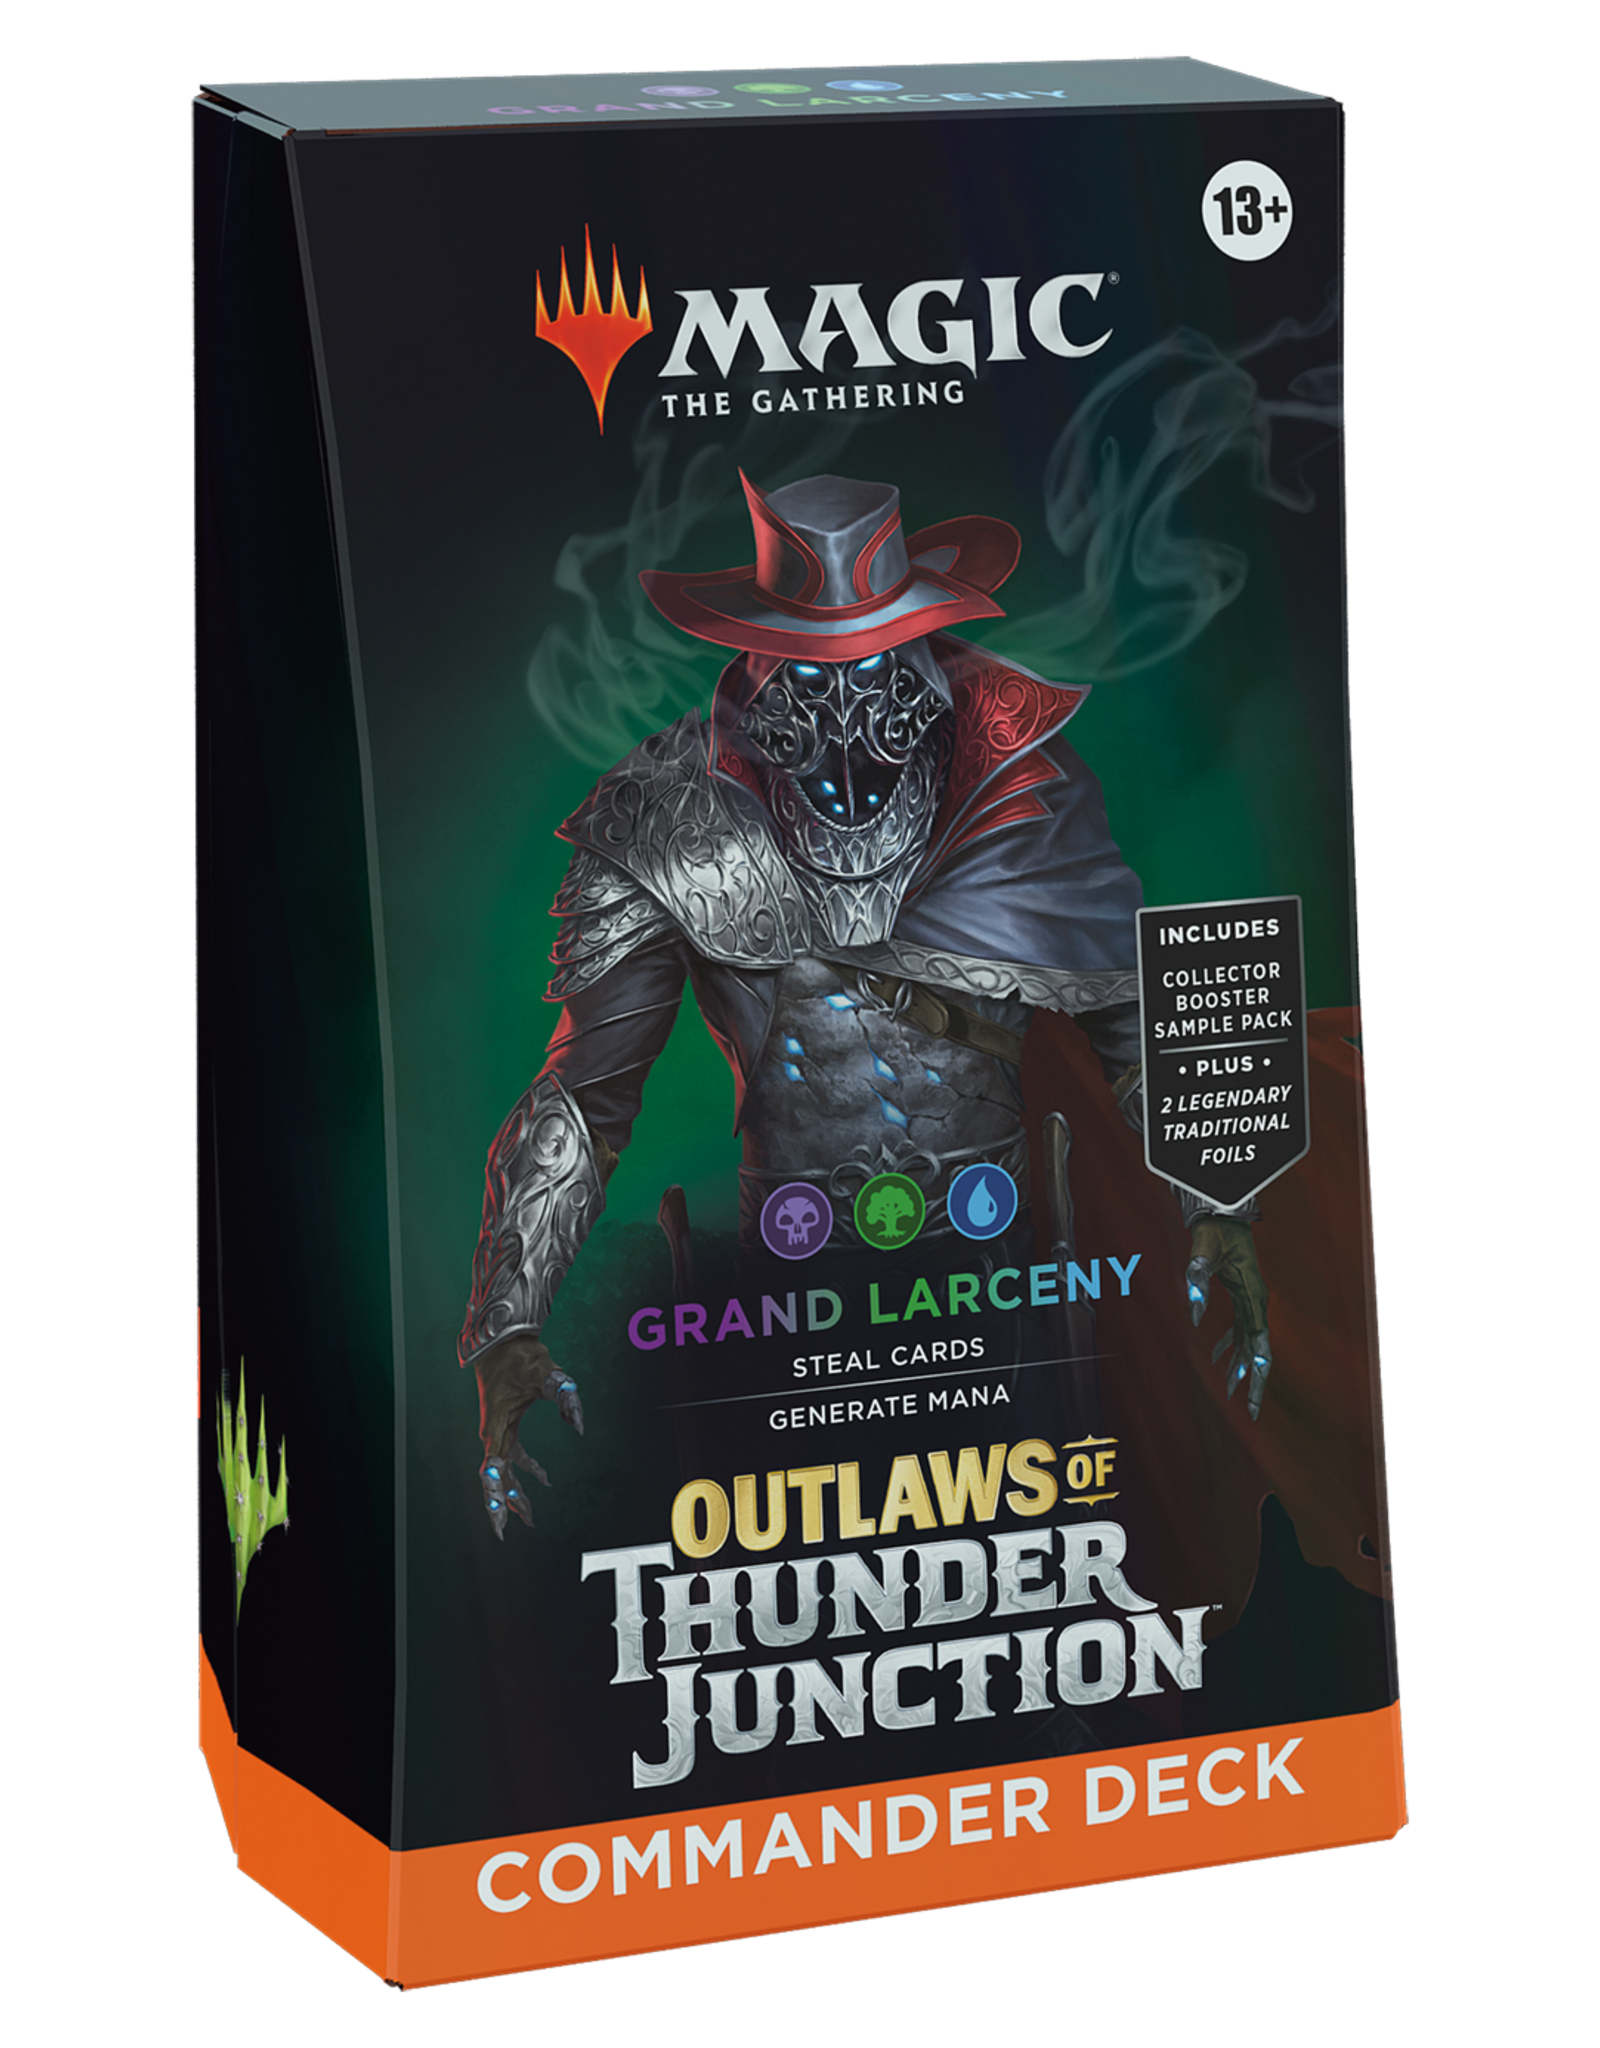 Magic the Gathering: Outlaws of Thunder Junction - Commander Deck - Grand Larceny